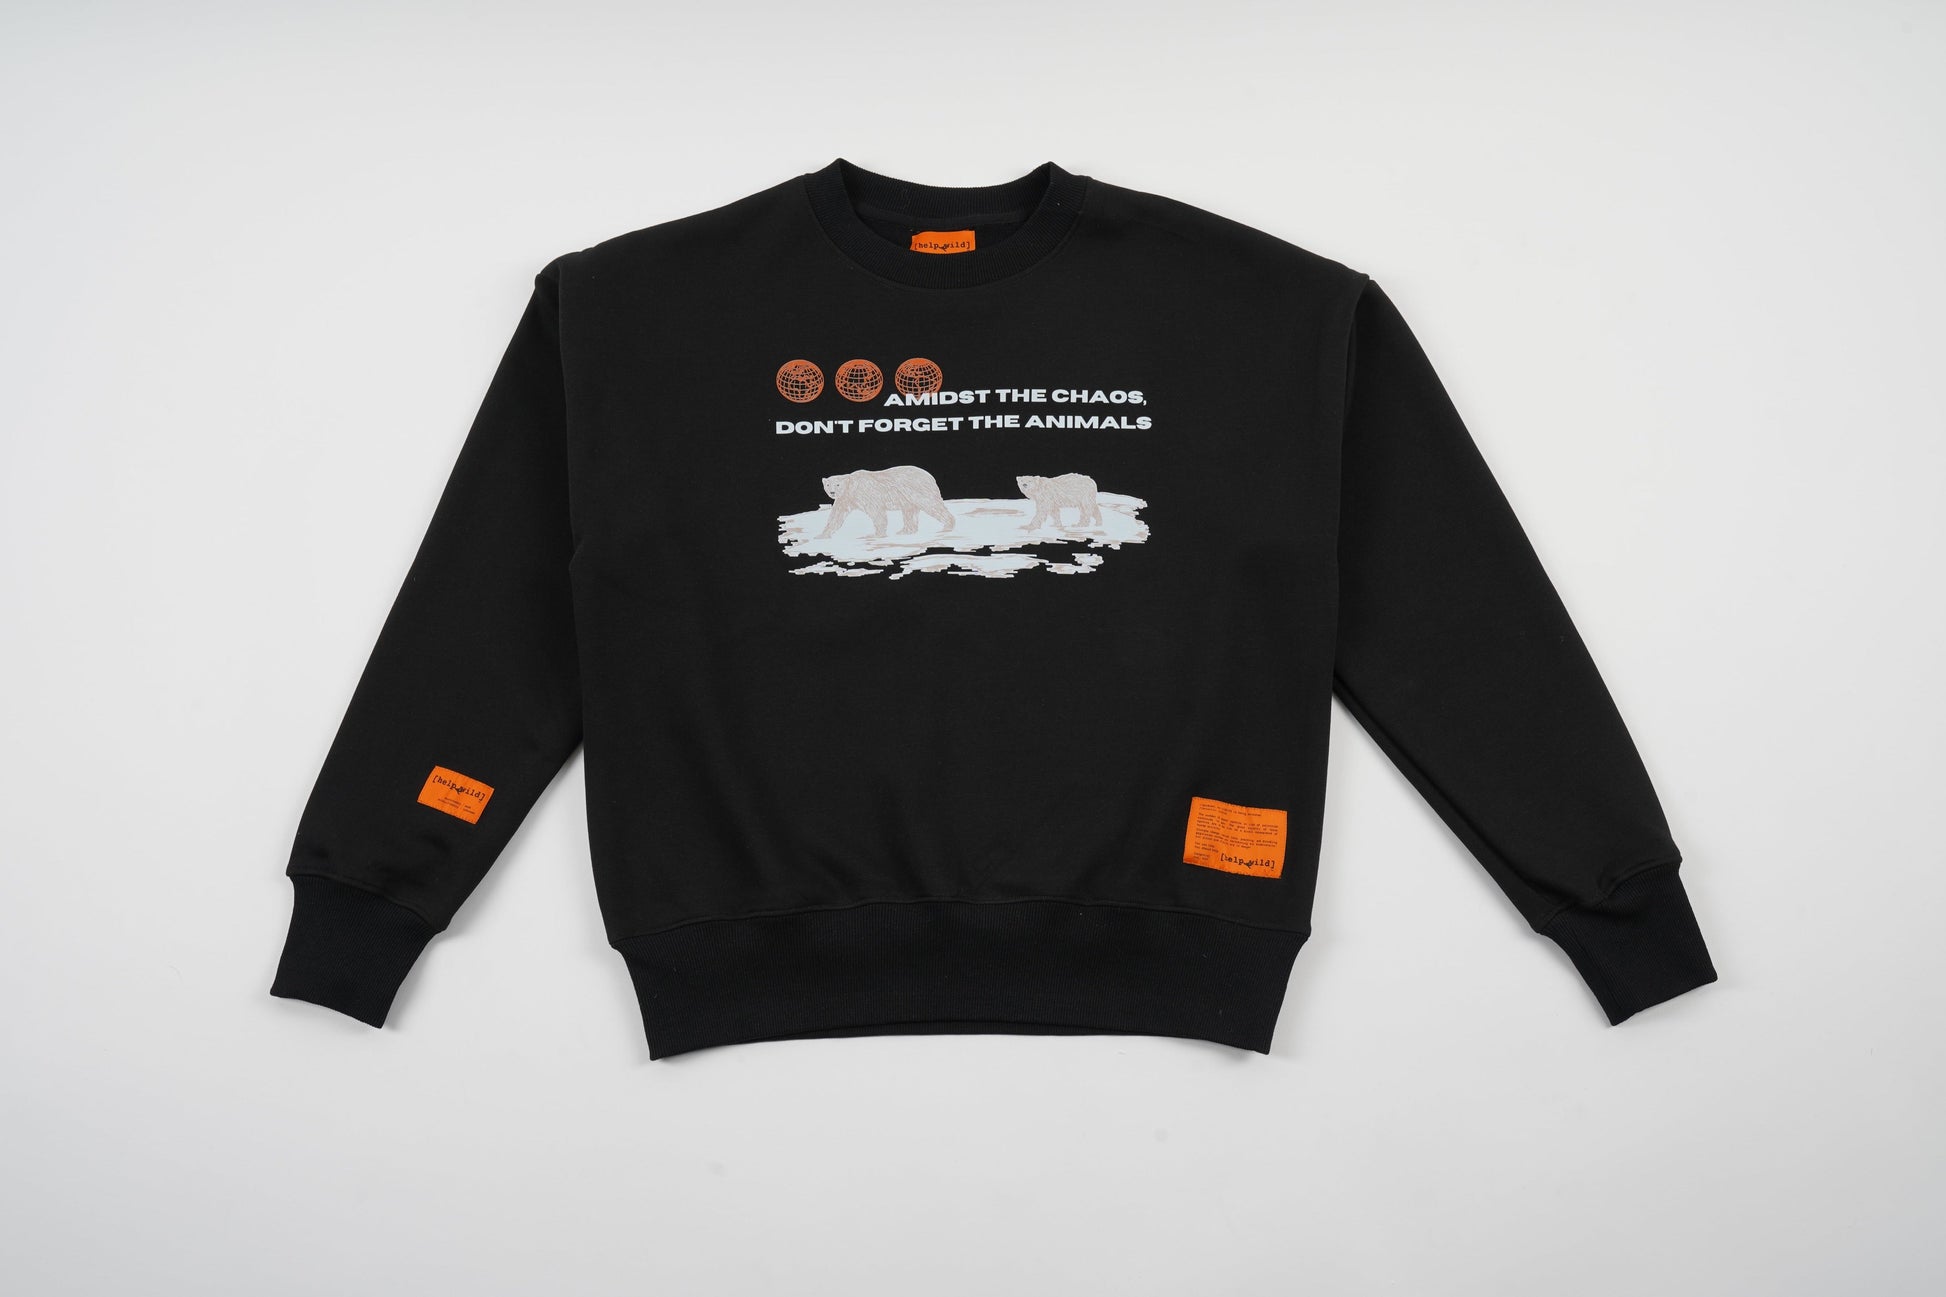 Polar Bear Endangered Species sweater or sweatshirt made of organic cotton in the streetwear style with the phrase Amidst The Chaos Don't Forget The Animals